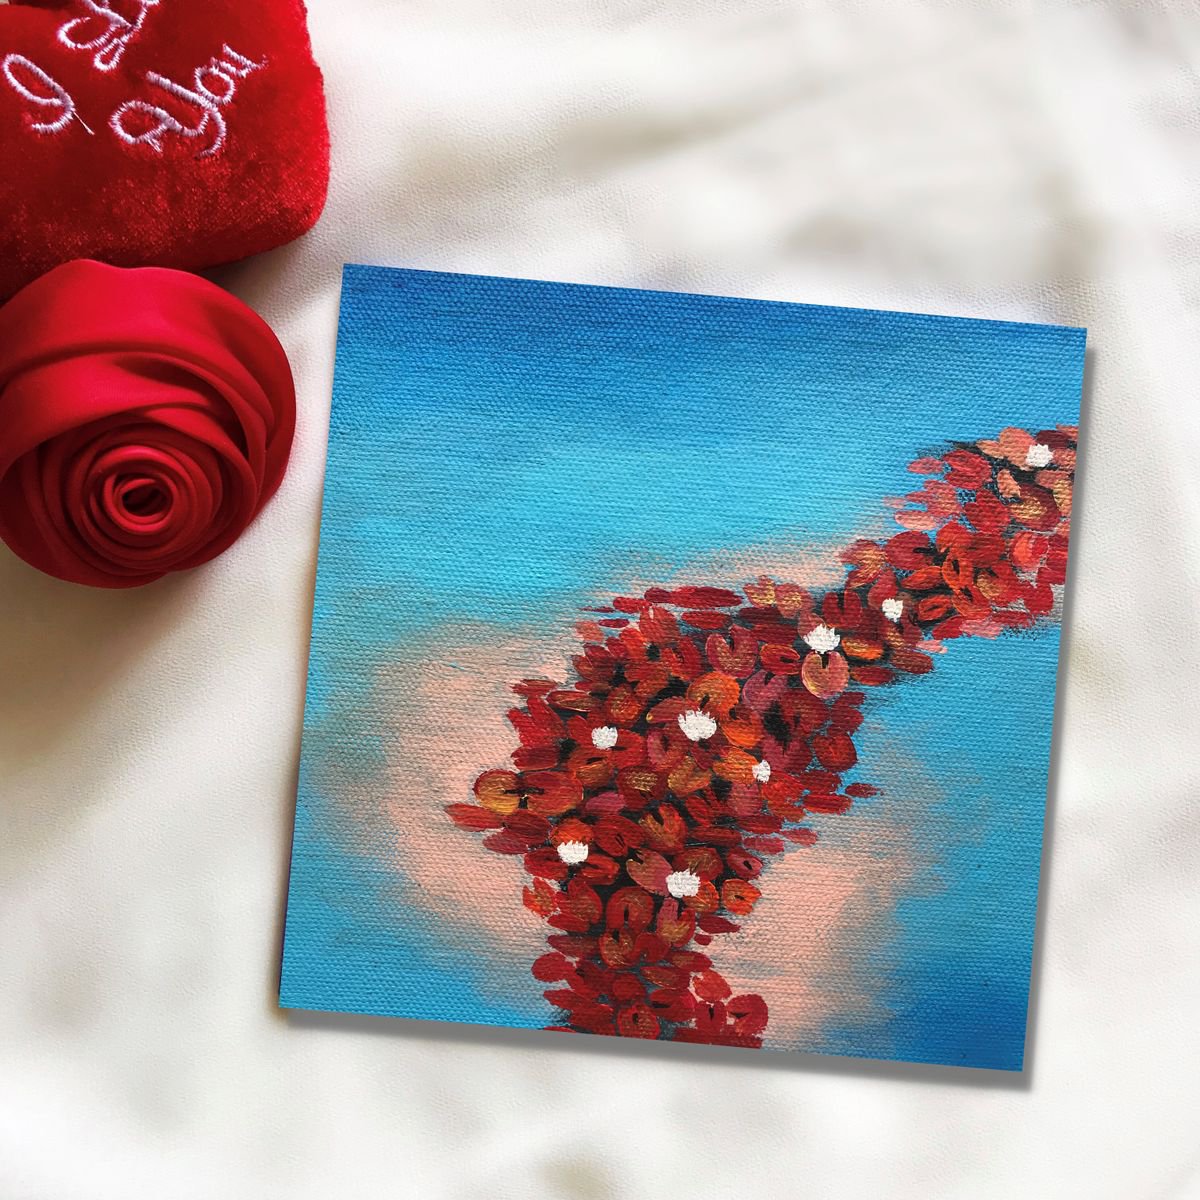 Water Lilies !! Red Flare!! Abstract !! Small Painting !! Mini Painting !! by Amita Dand